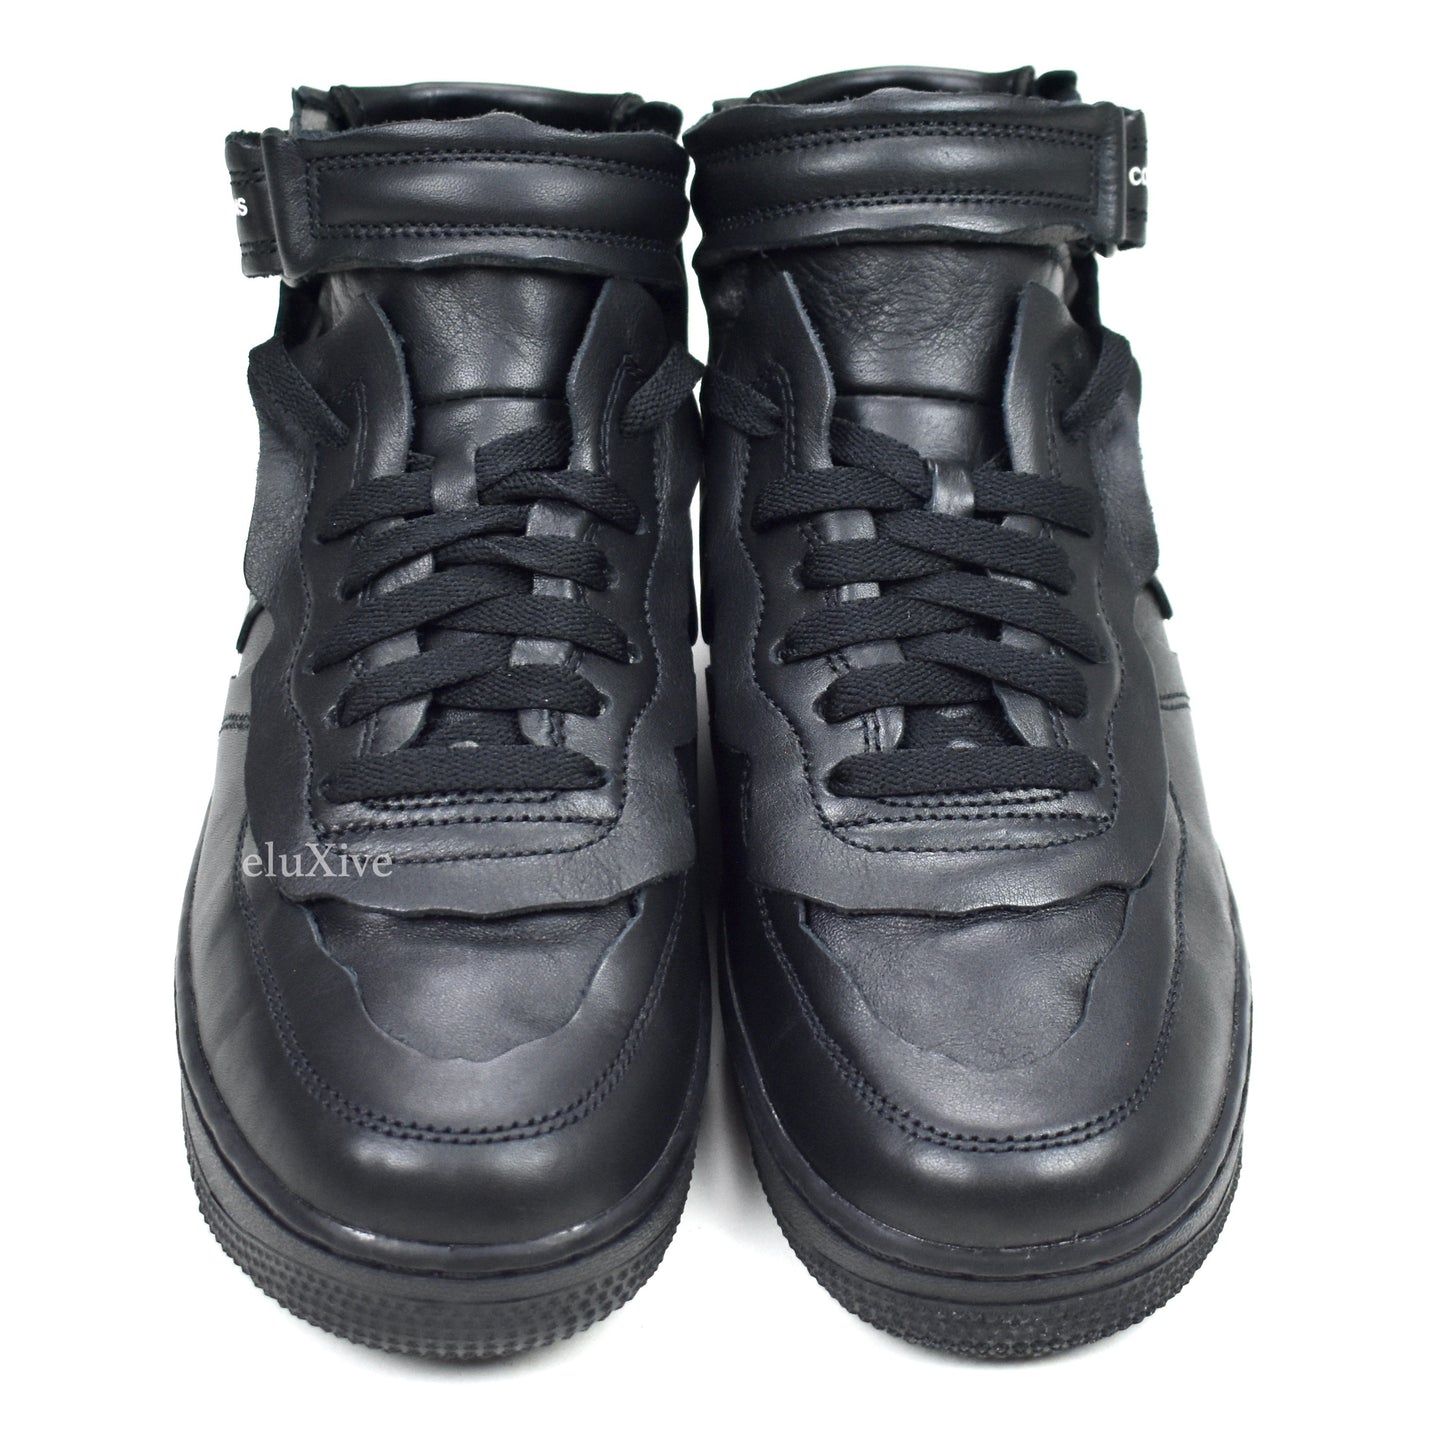 Comme des Garcons x Nike - Air Force 1 Mid CDG (Black)